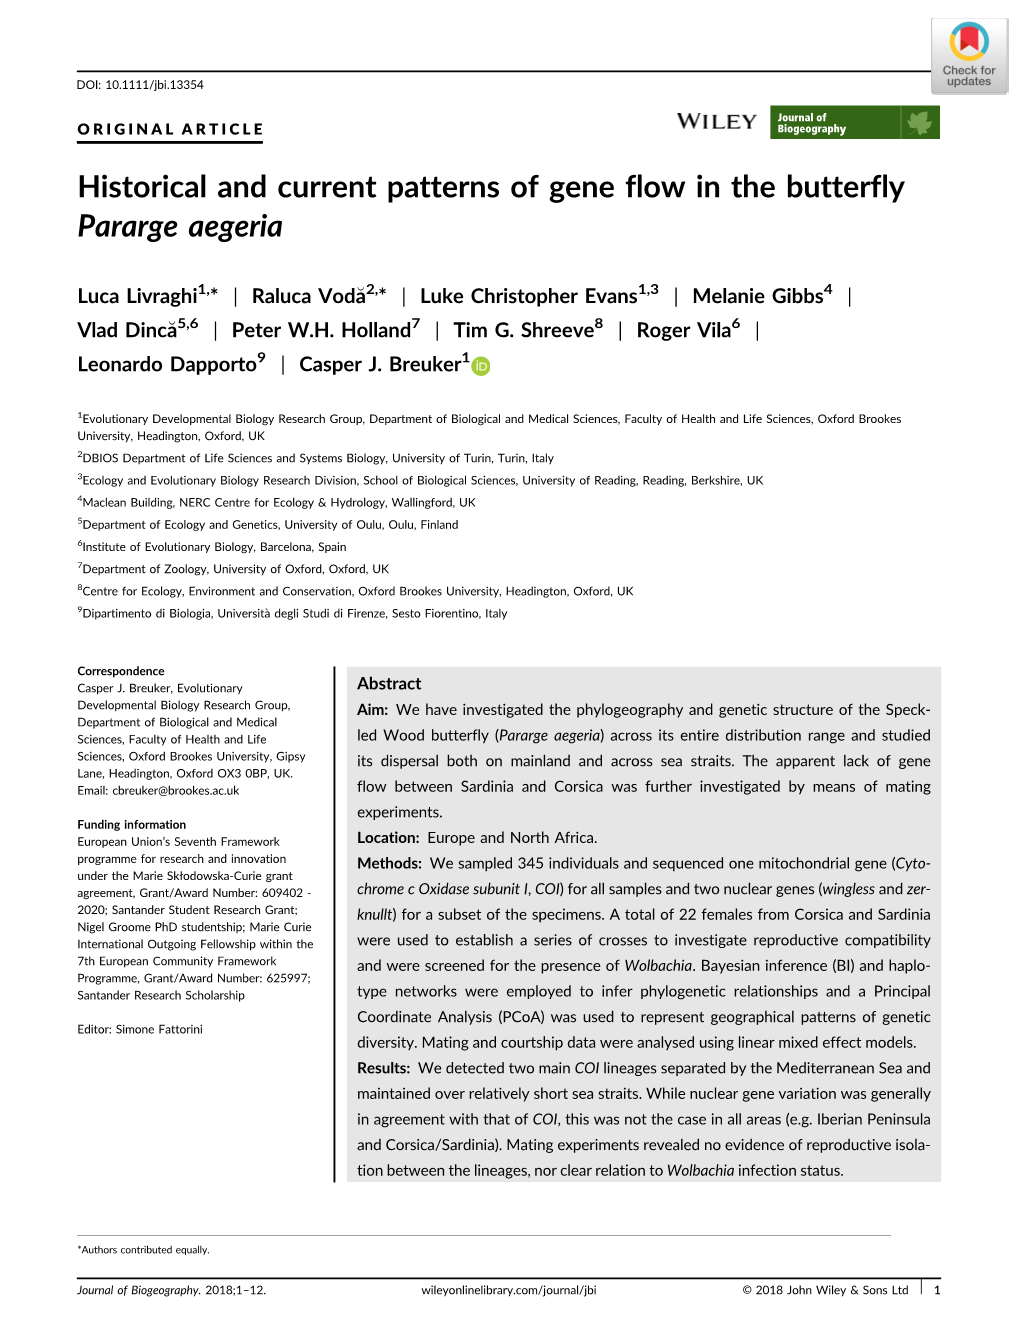 Historical and Current Patterns of Gene Flow in the Butterfly Pararge Aegeria